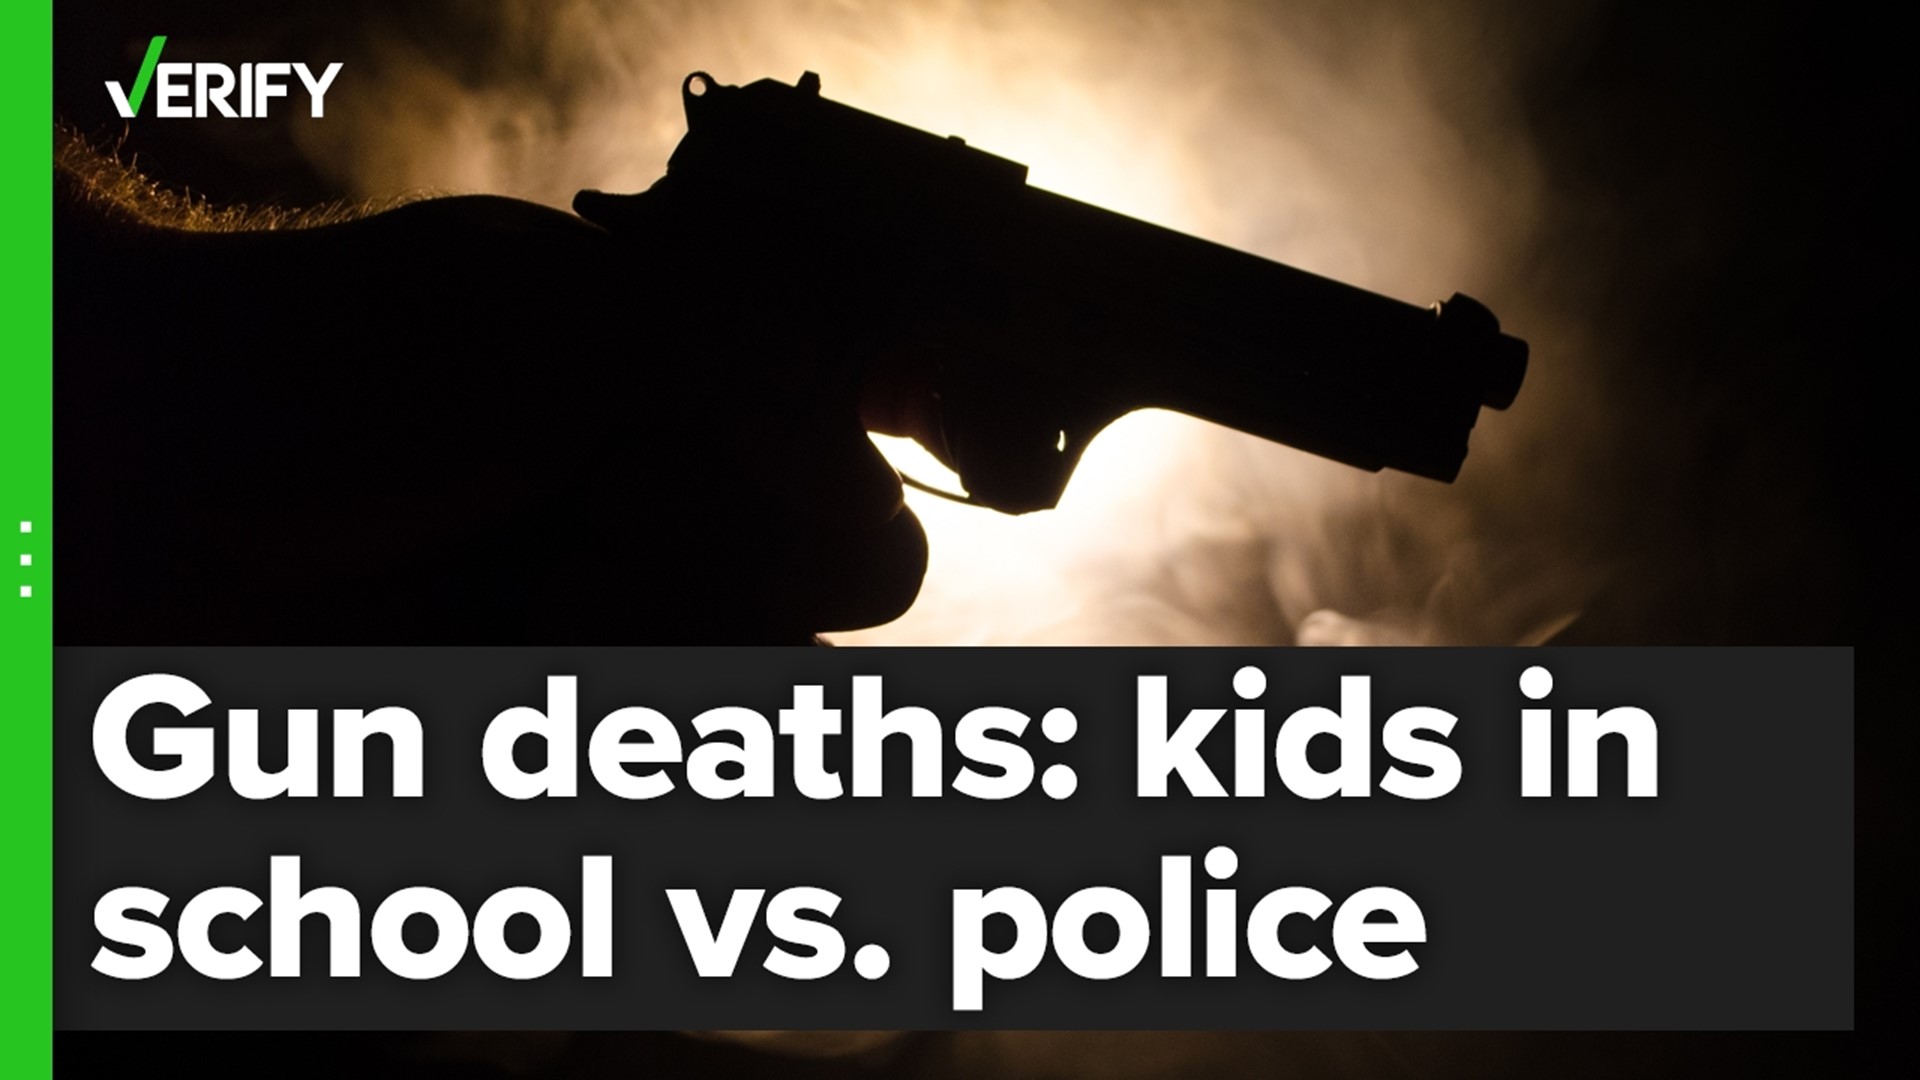 This year, 24 children have been killed in school shootings as of May 25. During the same time, between 17 & 21 on-duty law enforcement officers have died from guns